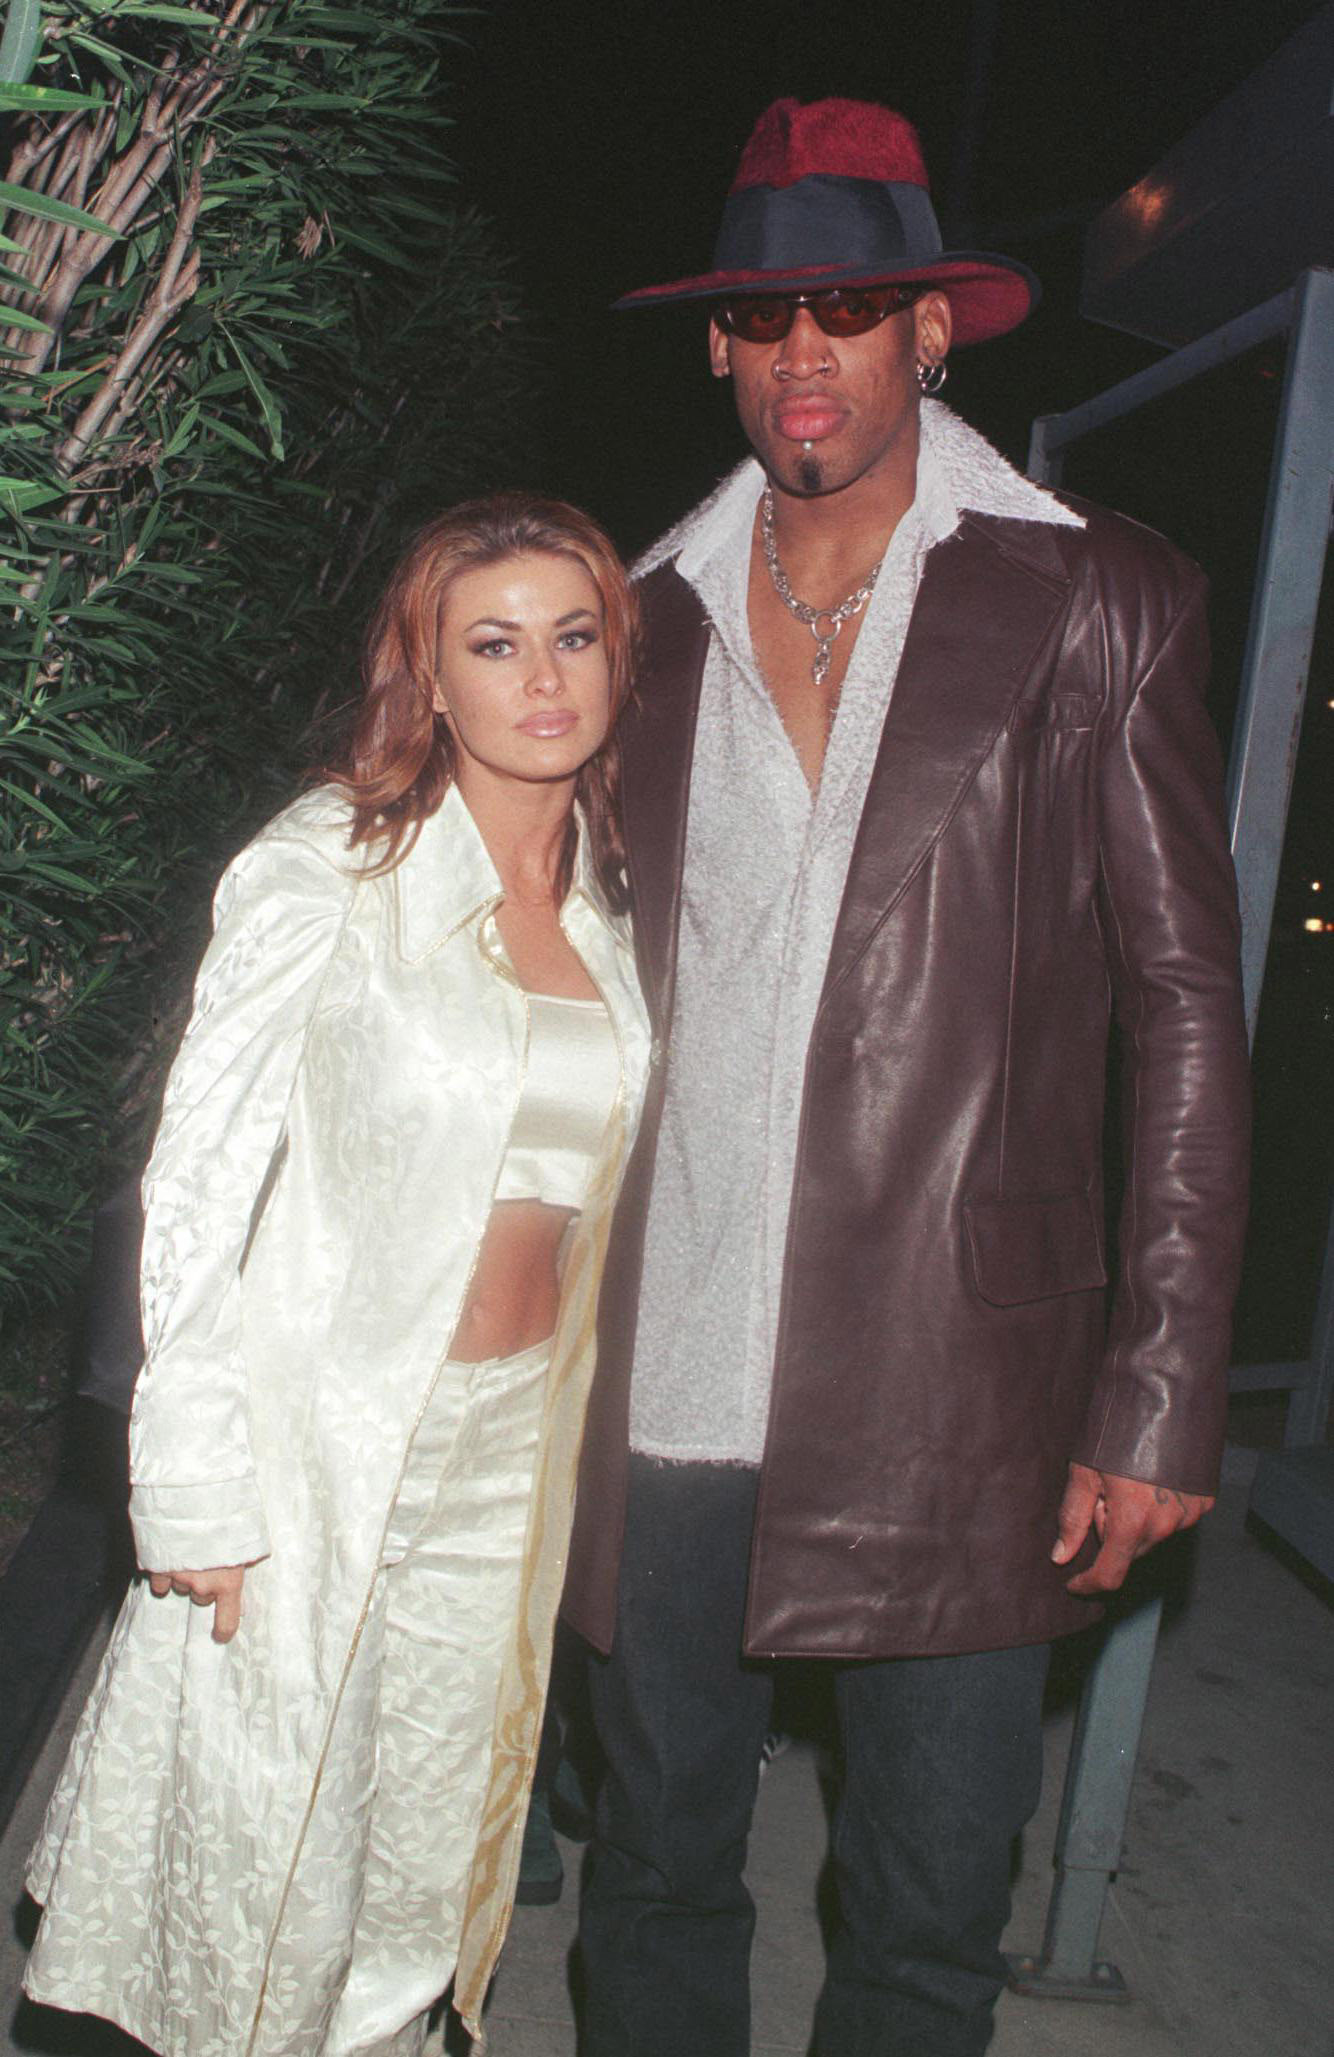 Dennis Rodman and Carmen Electra at GOODBAR in Beverly Hills in 1999